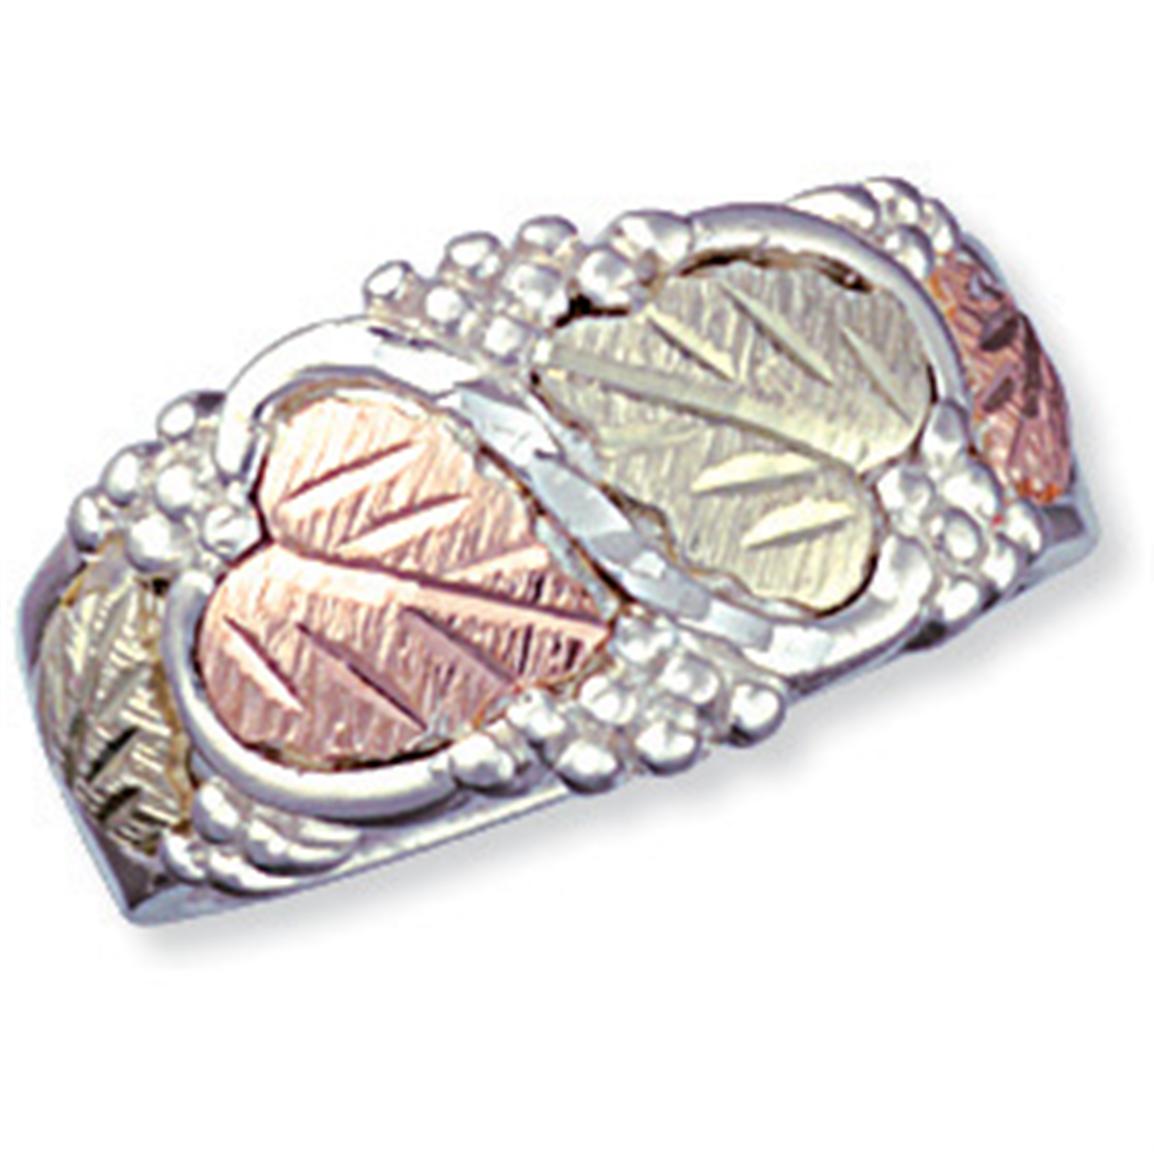 Landstrom's® Sterling Silver Woman's Ring with Black Hills Gold Trim